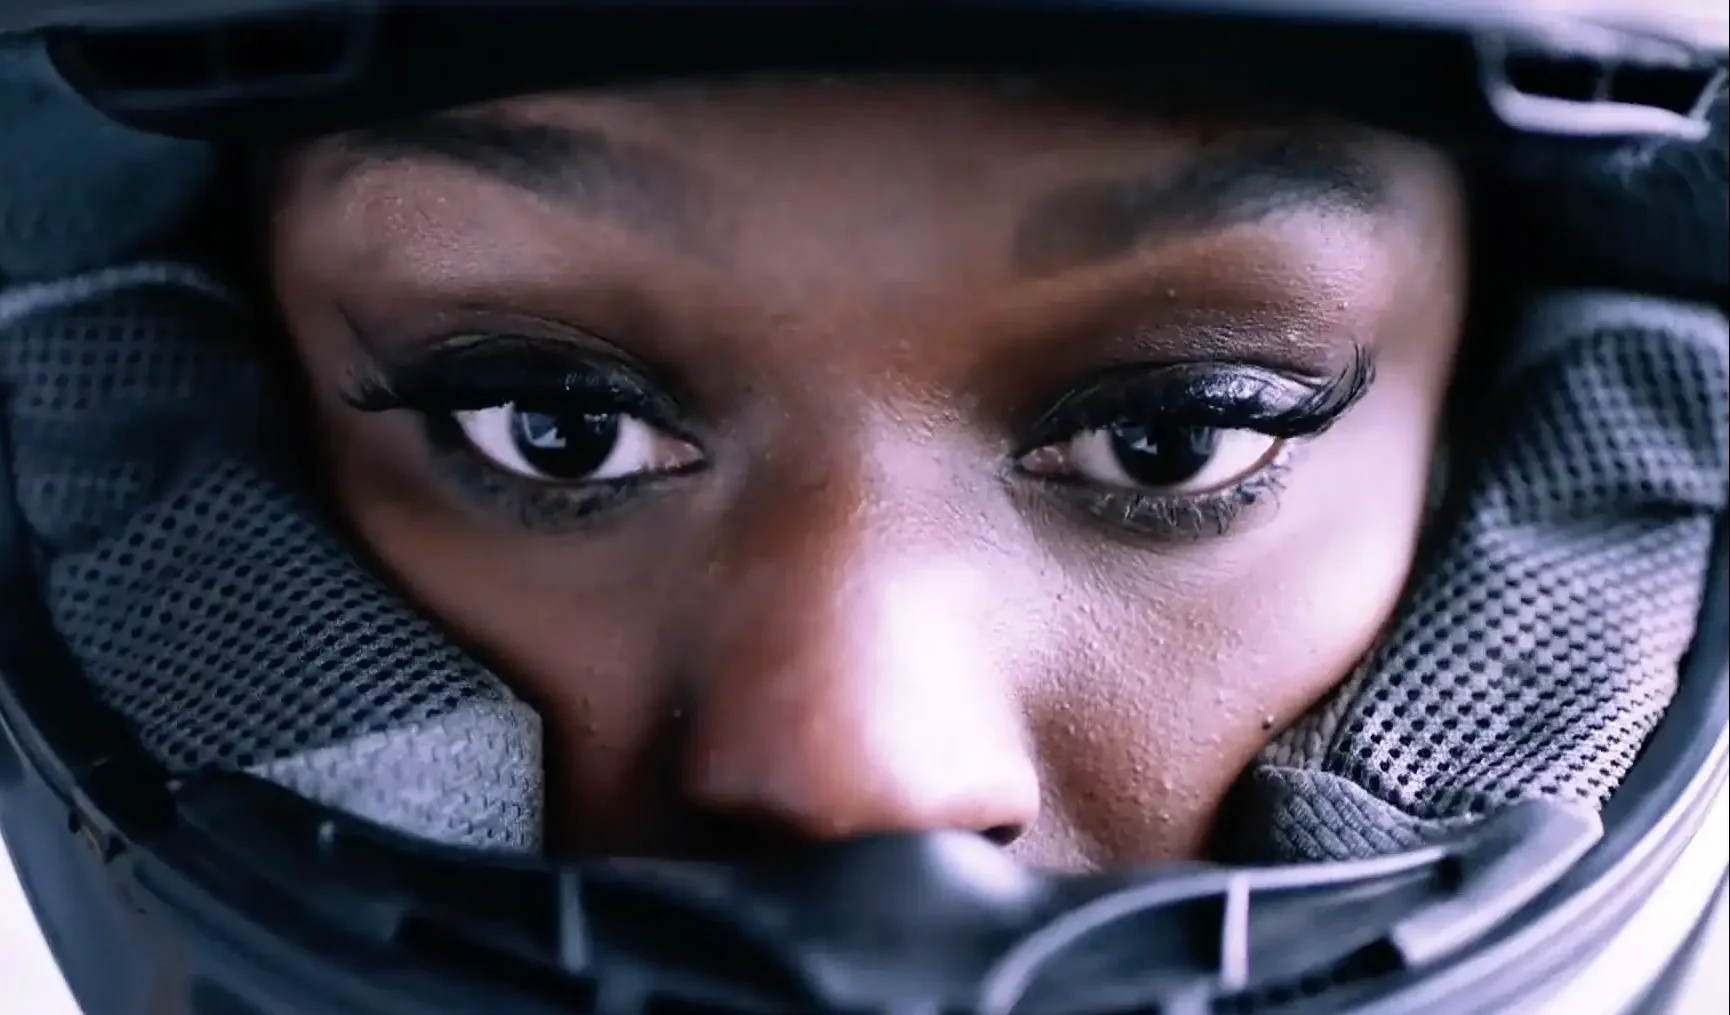 Close-up of a woman's face wearing a black motorcycle helmet, focusing on her eyes visible through the helmet's sales content library.